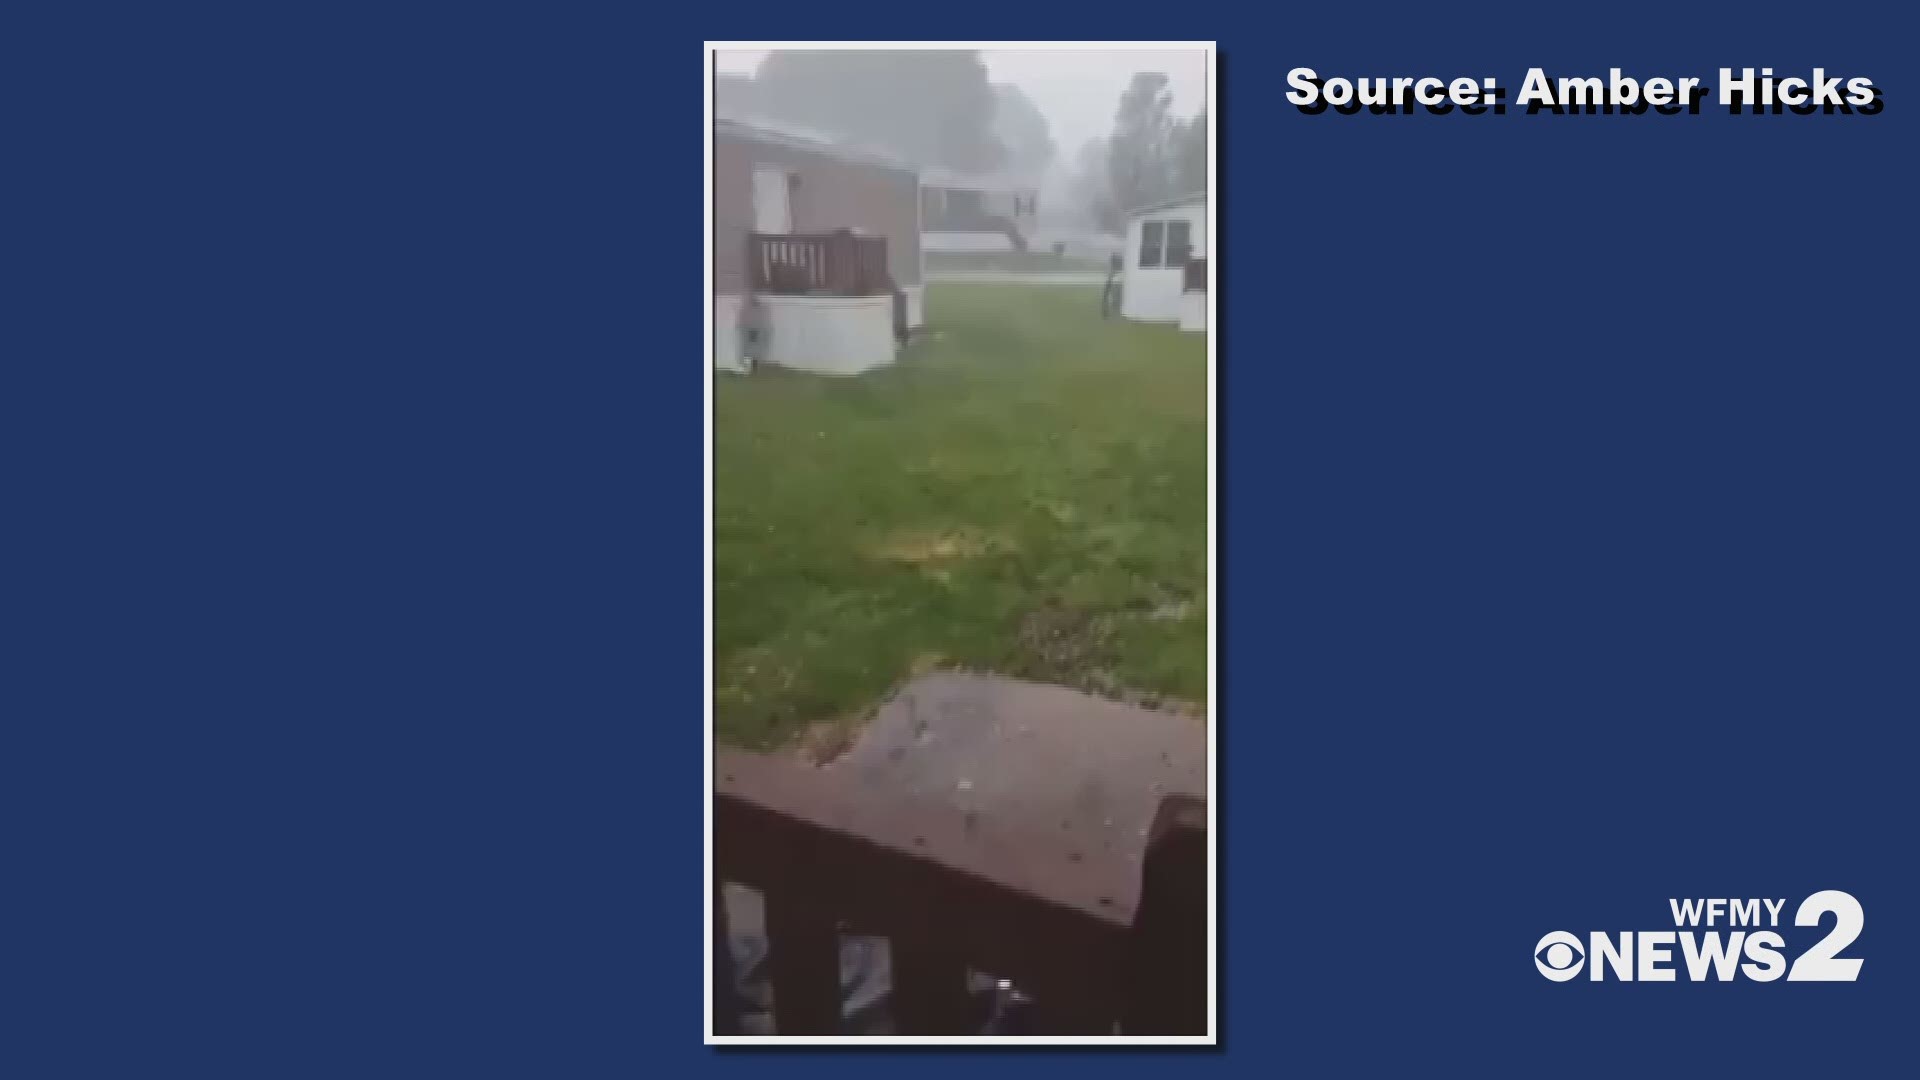 Storms popped up across the Triad Tuesday afternoon. This video is from Amber Hicks in Browns Summit, who saw plenty of hail.